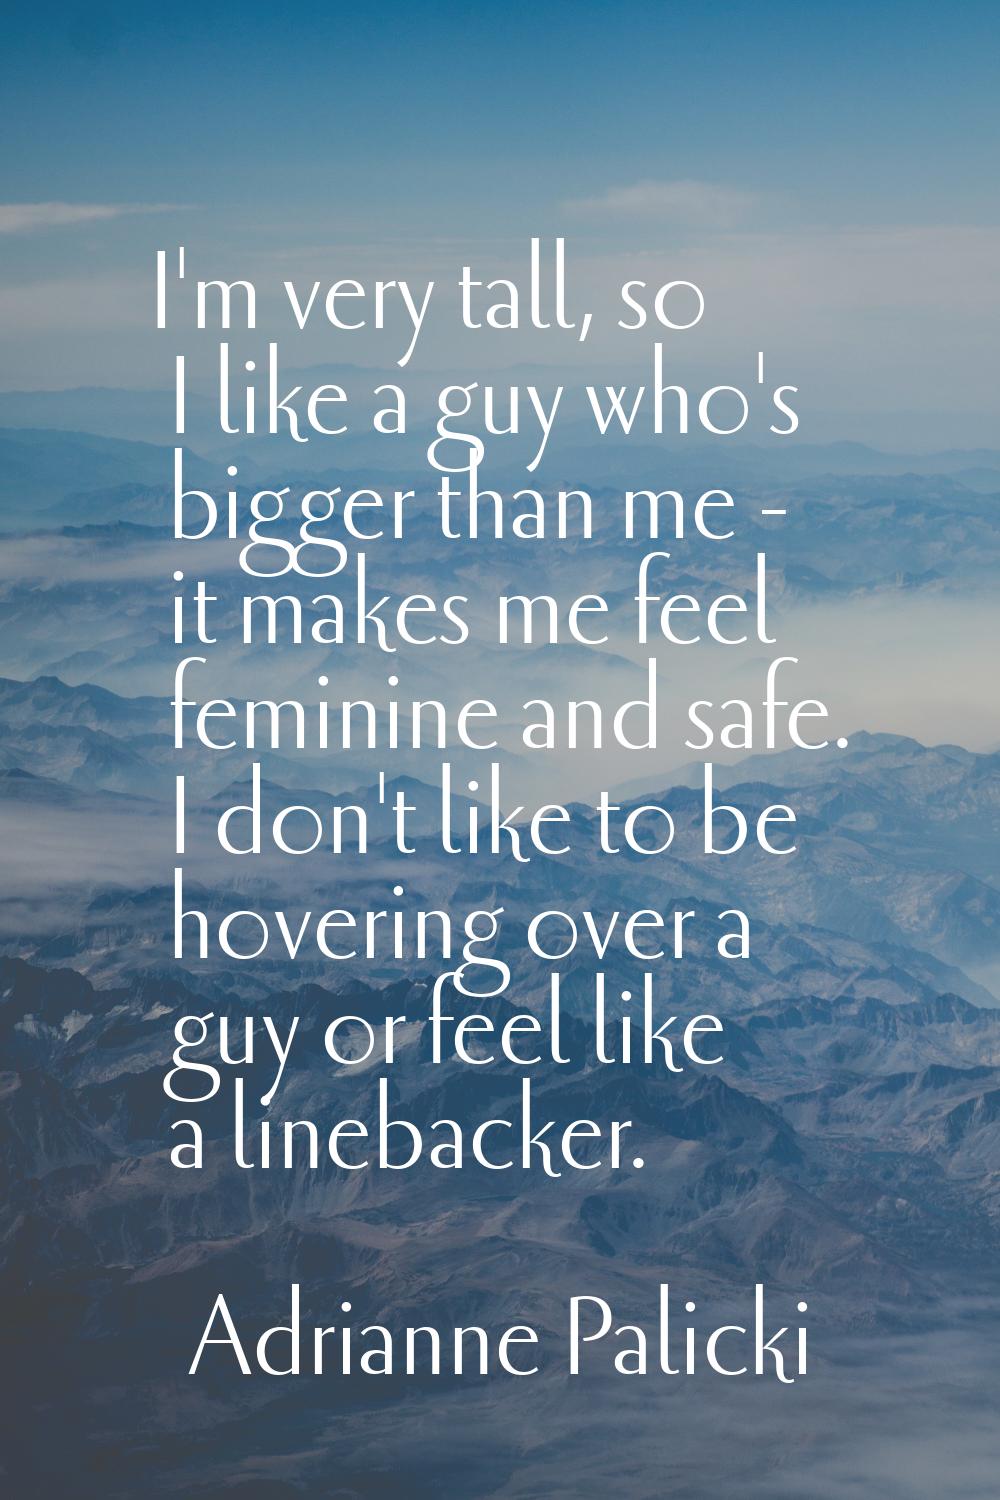 I'm very tall, so I like a guy who's bigger than me - it makes me feel feminine and safe. I don't l